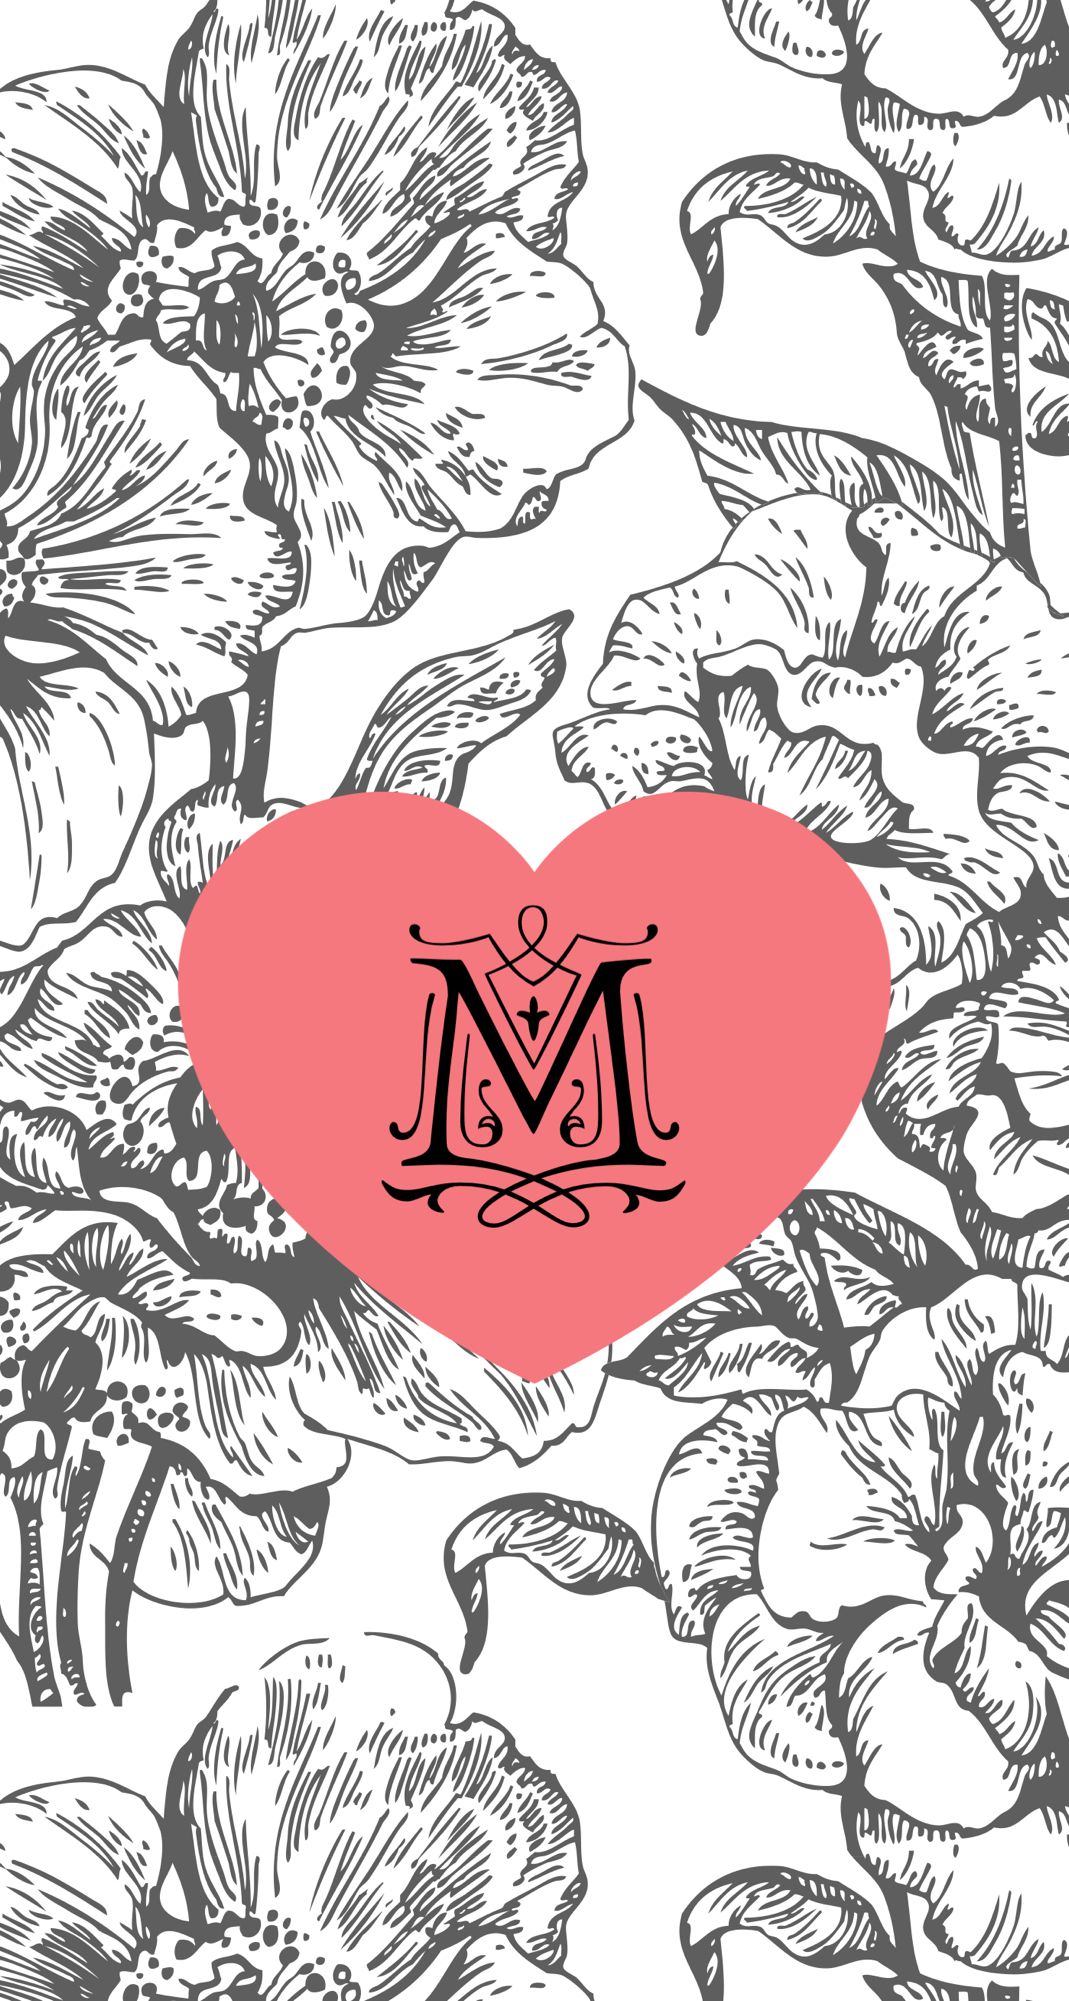 FLORAL AND HEART WITH THE MONOGRAM / LETTER M. iPhone wallpaper image, Monogram wallpaper, Alphabet wallpaper